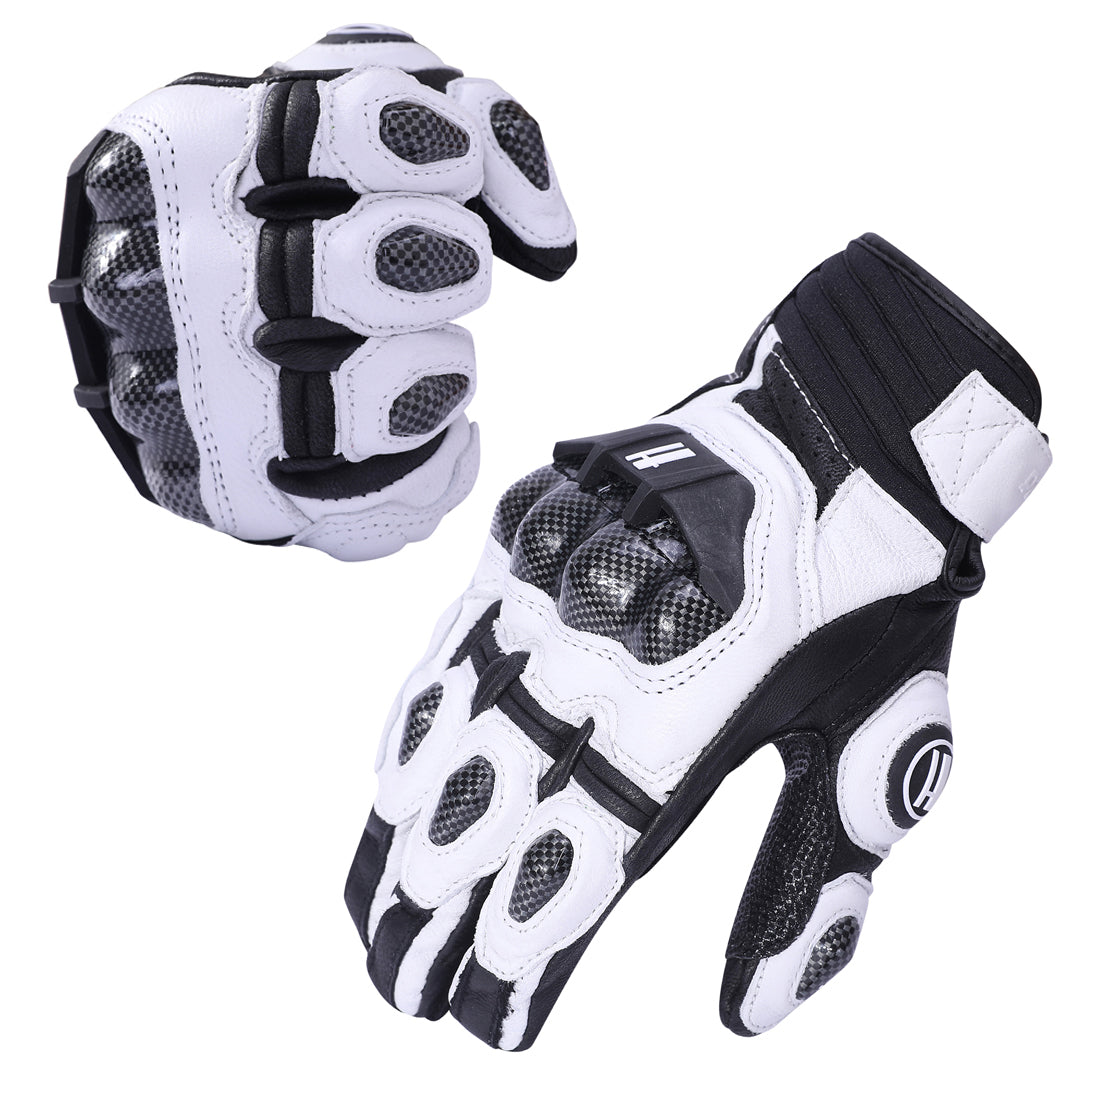 Harssidanzar Motorcycle Gloves for Men, Breathable Leather Driving Glo